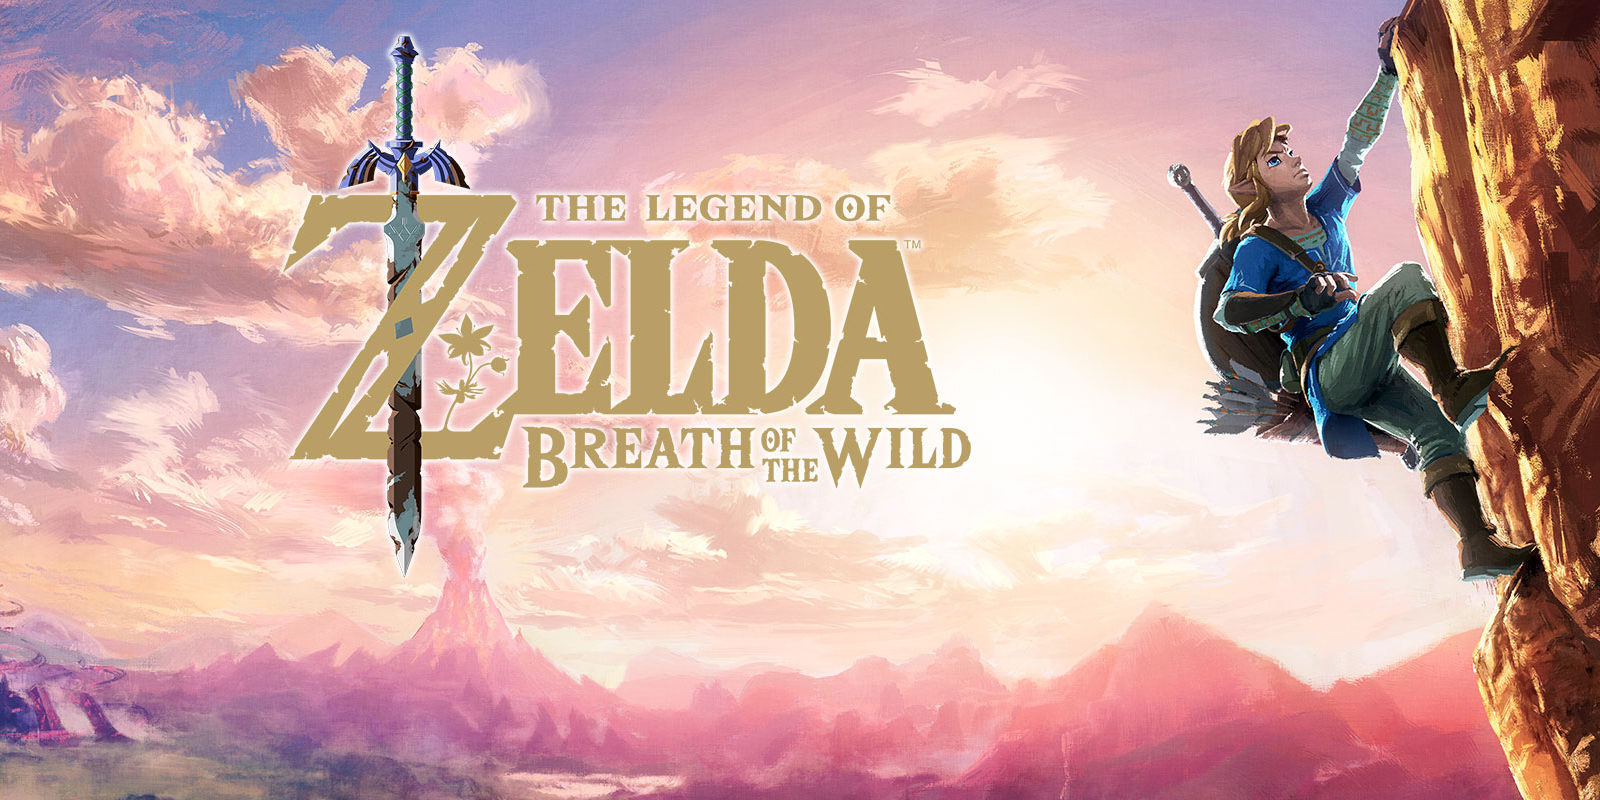 the legend of zelda breath of the wild max hearts and stamina wish dlc